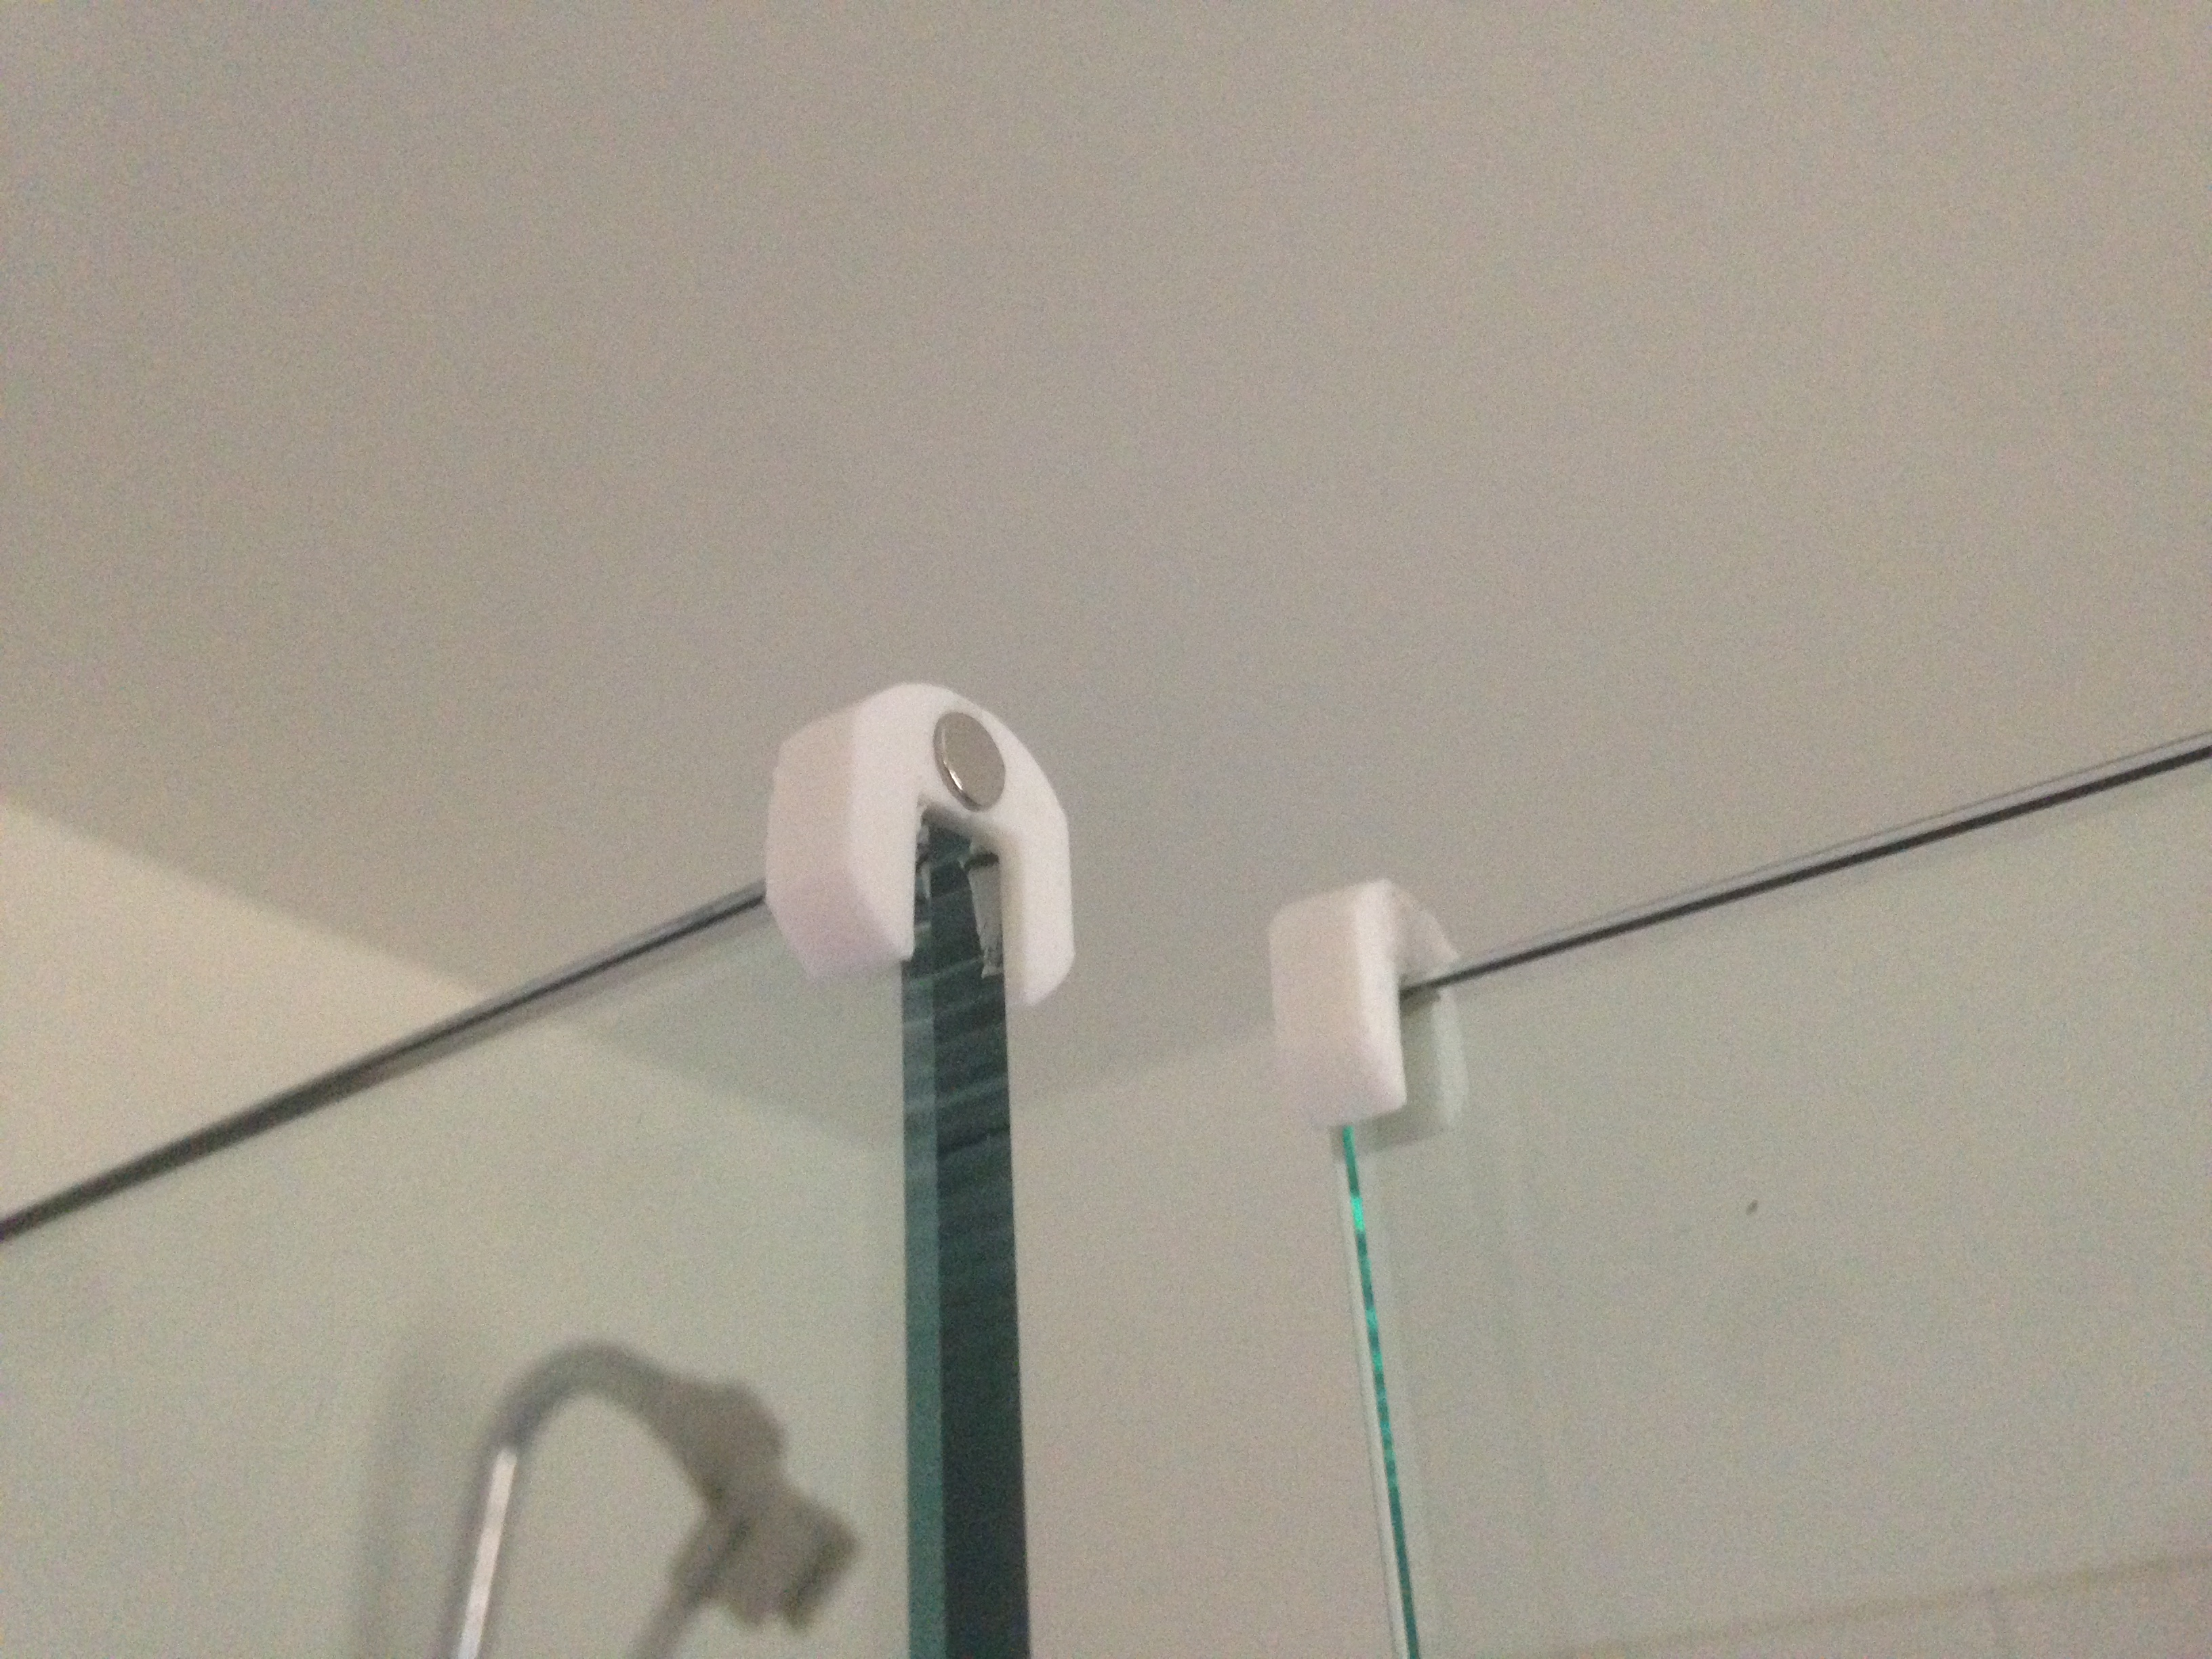 Glass Shower Door Magnet Brackets Stevecooley Thingiverse throughout sizing 3264 X 2448